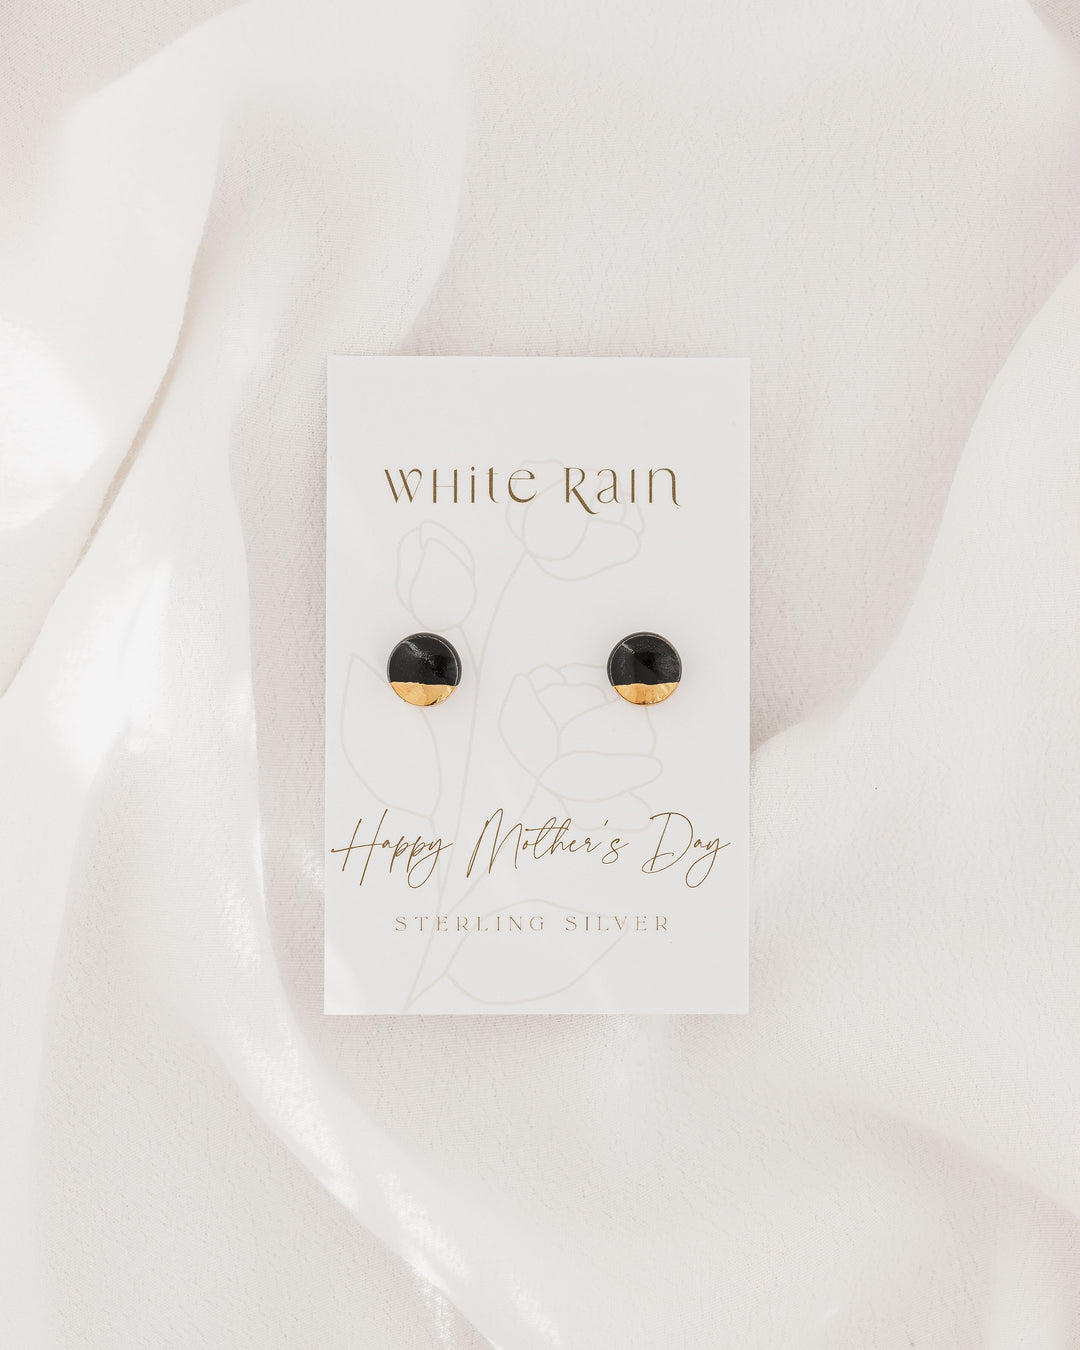 Circle shape Ceramic necklace and earrings gift set on a Happy Mother’s Day earring card